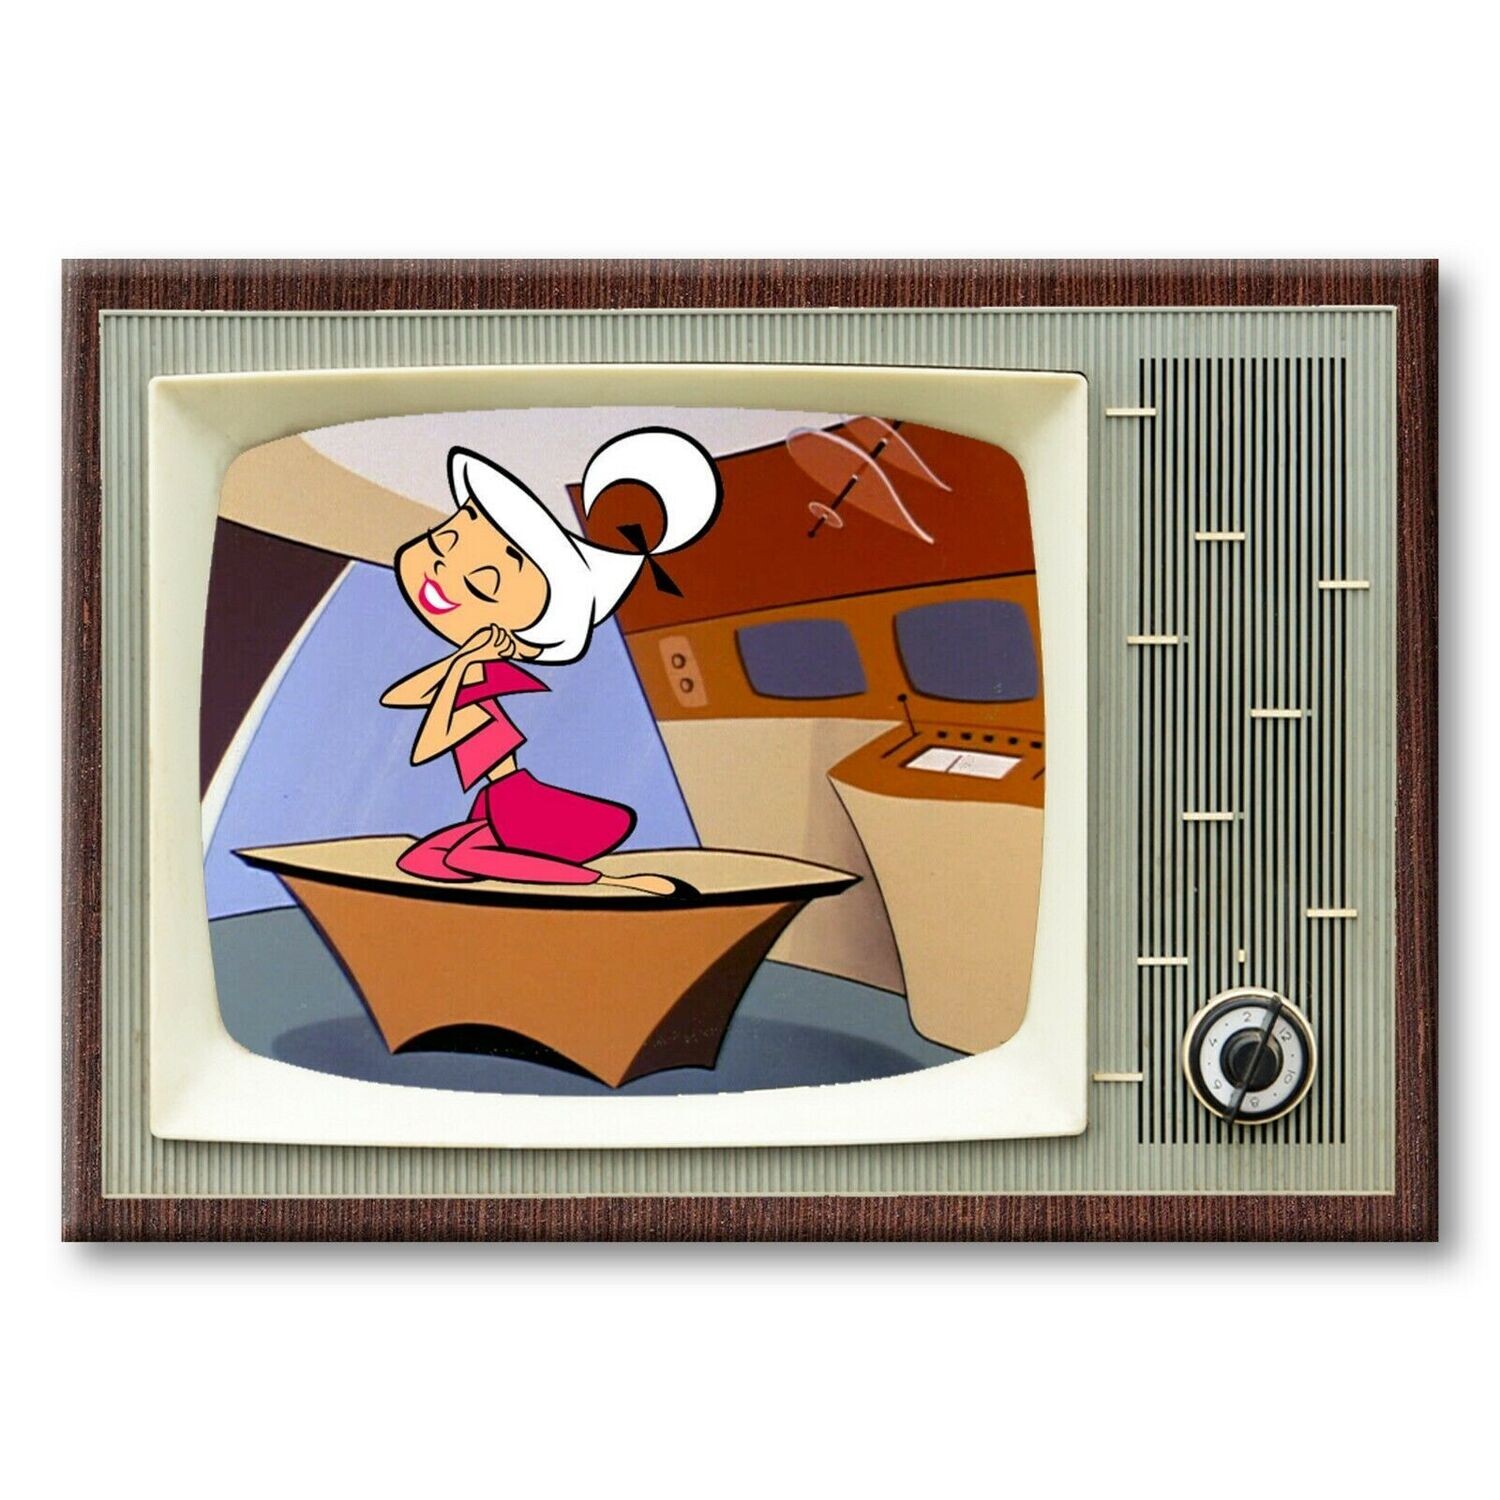 The Jetsons Judy Jetson Large Metal TV Magnet